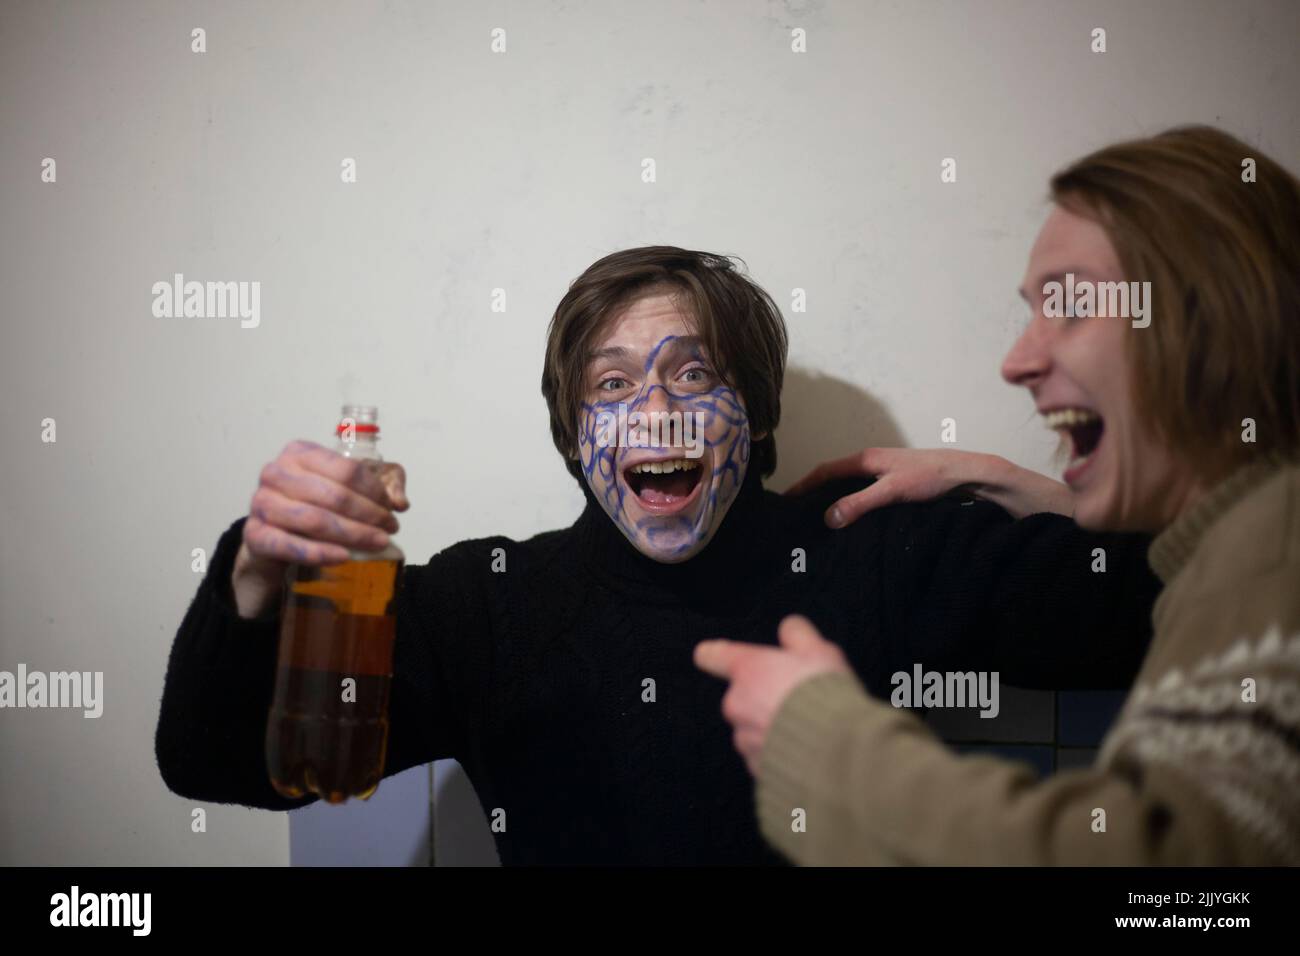 Guys drink alcohol at a party. Crazy guys having fun with beer. Stock Photo